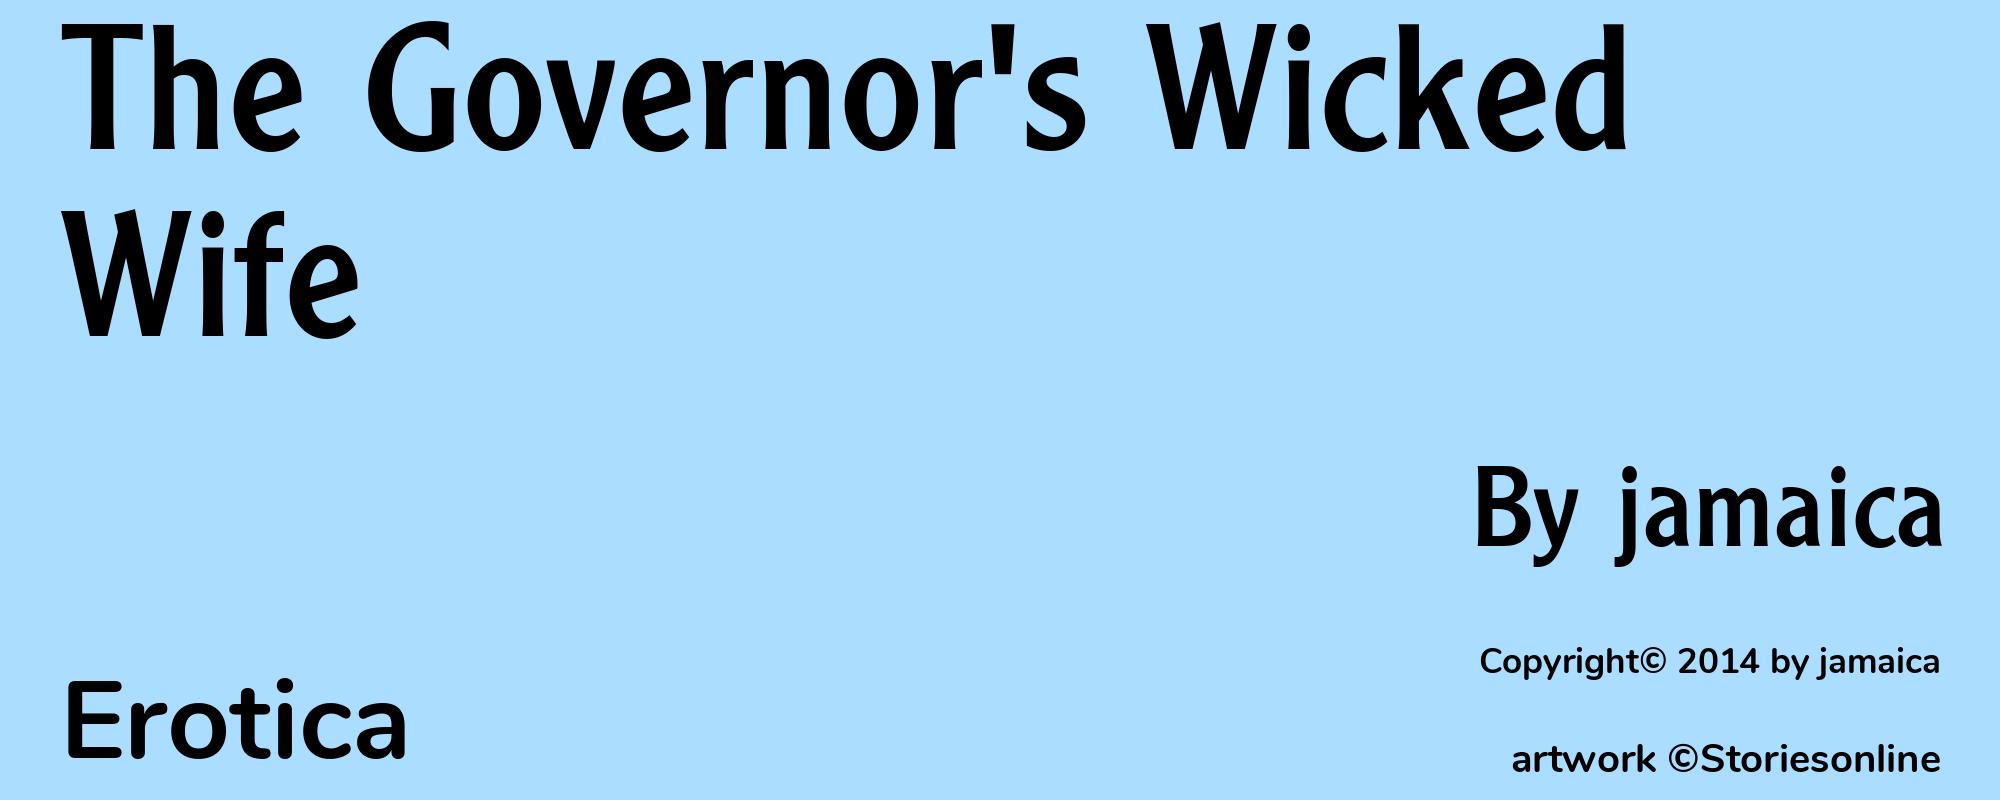 The Governor's Wicked Wife - Cover